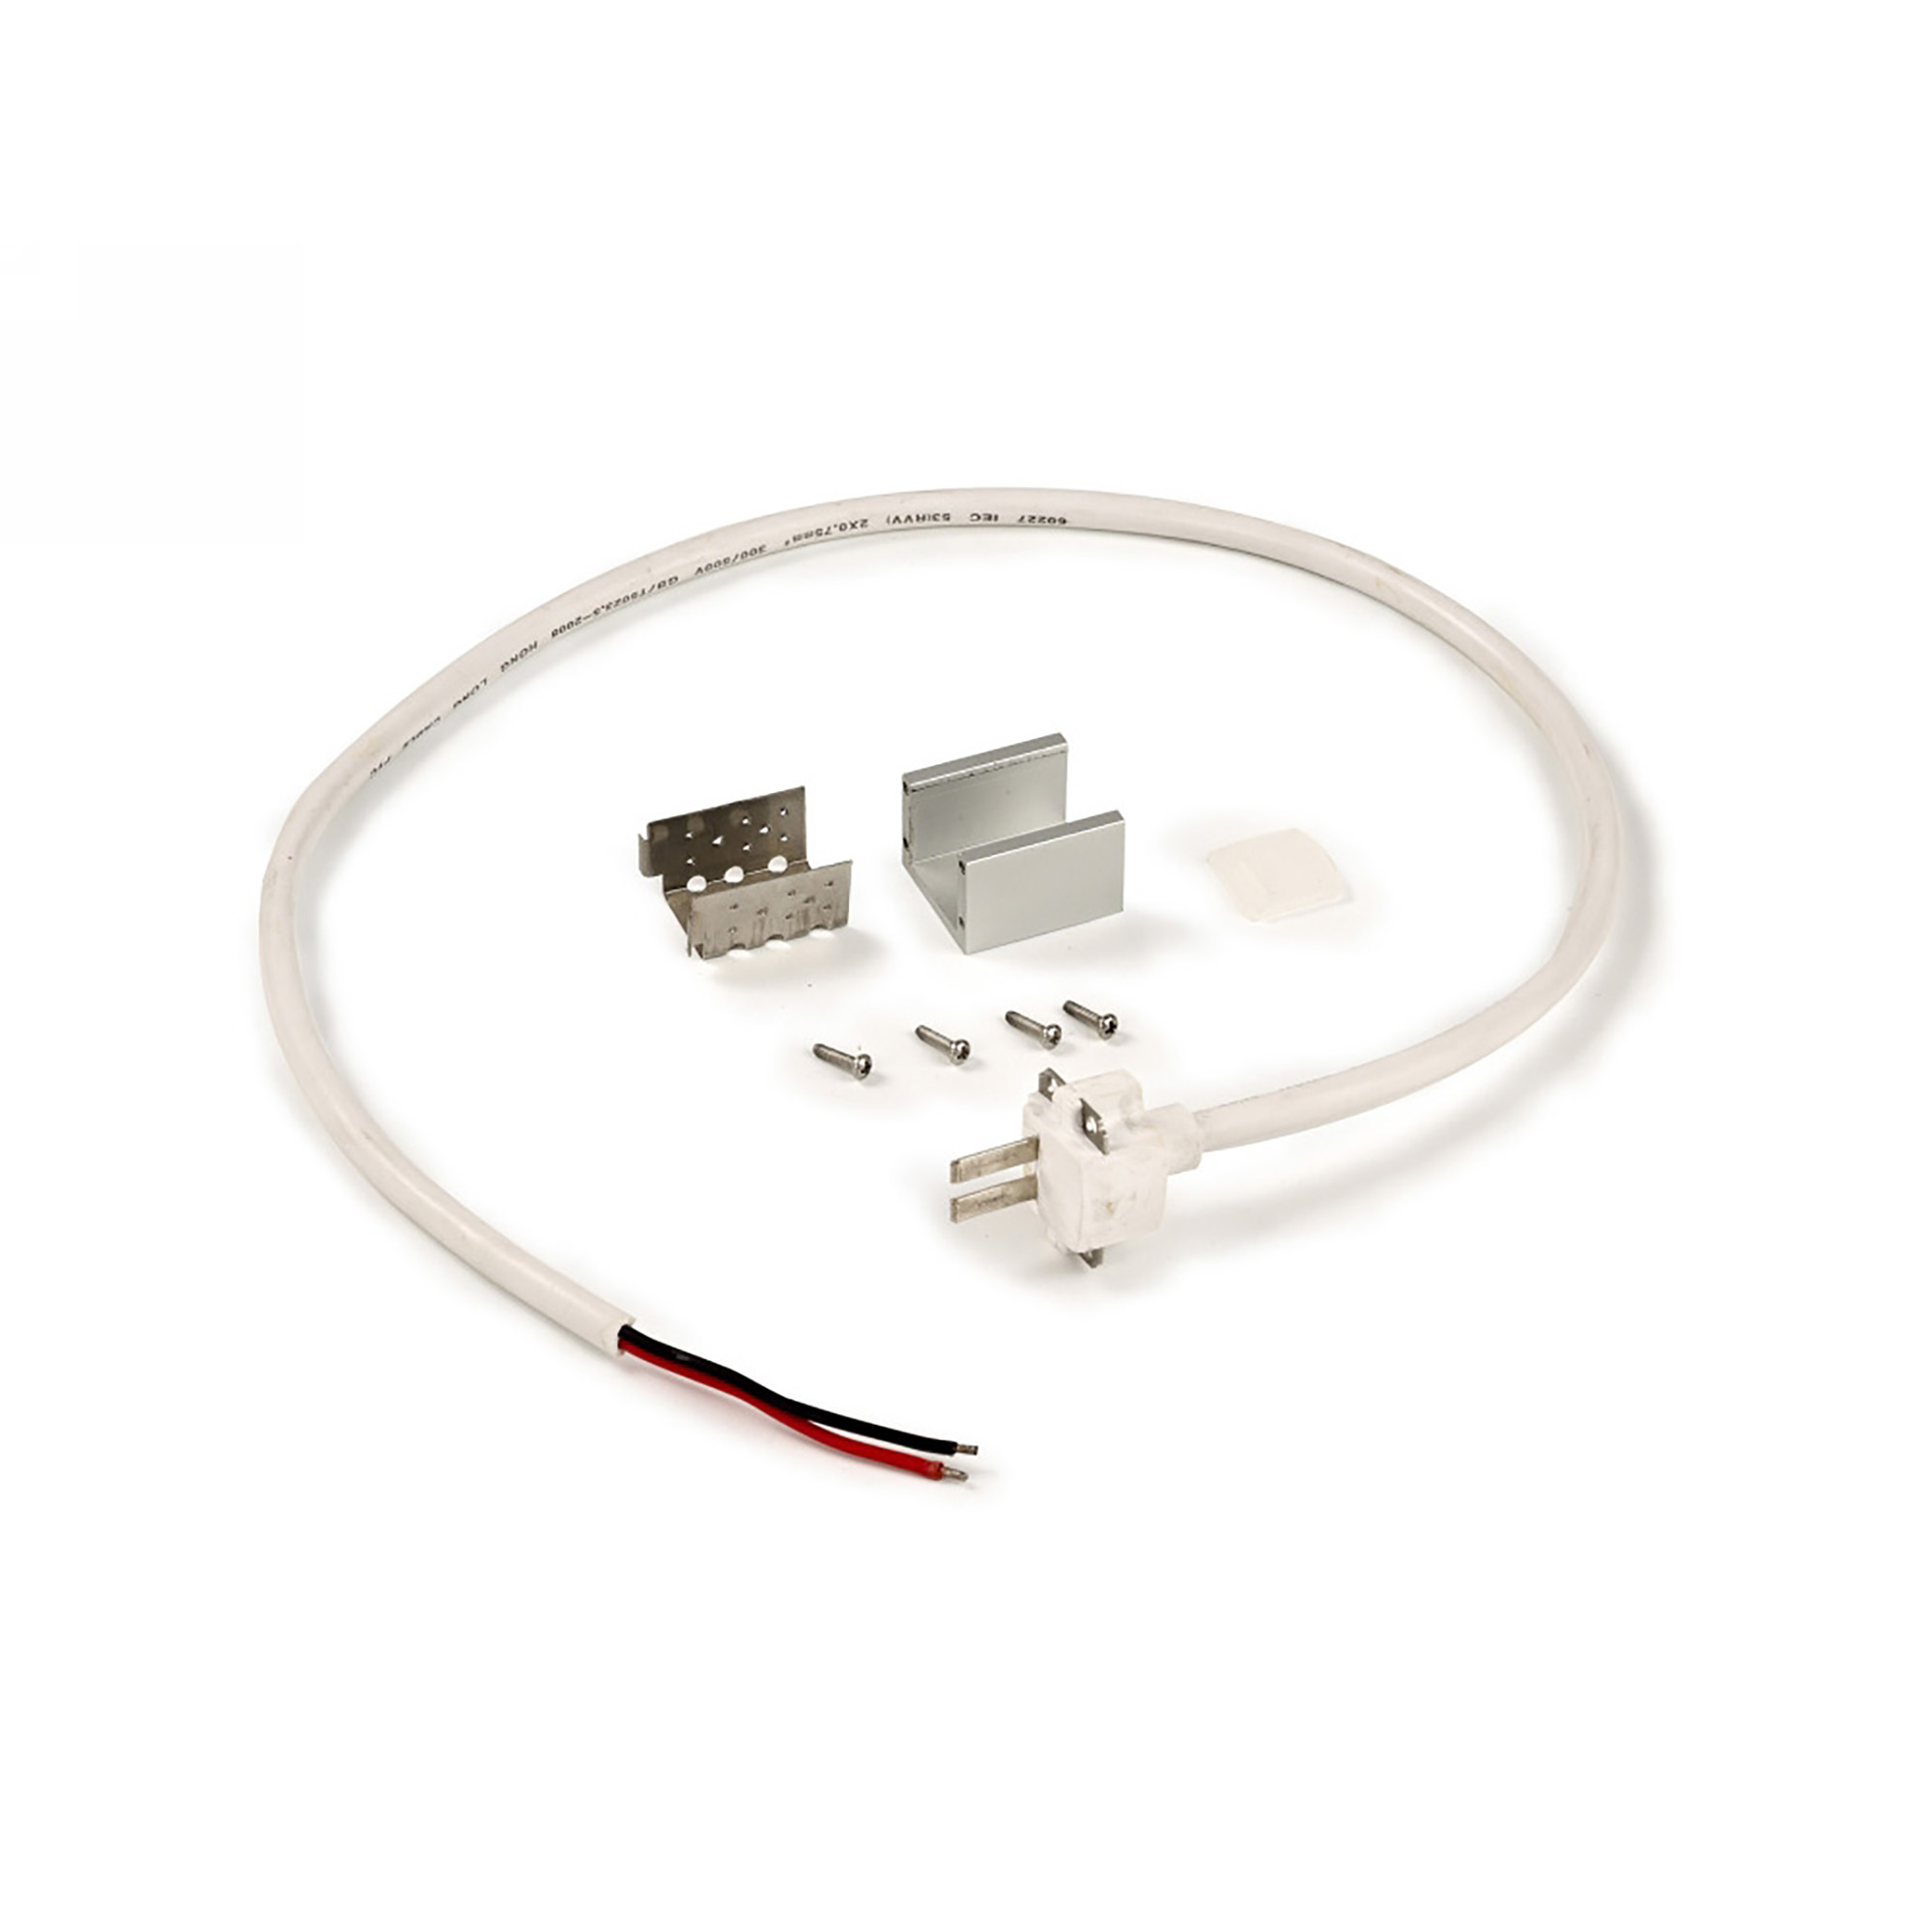 DX770038  Nexi 120TF/144TF, Front Left Side Connection Kit 0.6m Cable IP67/68